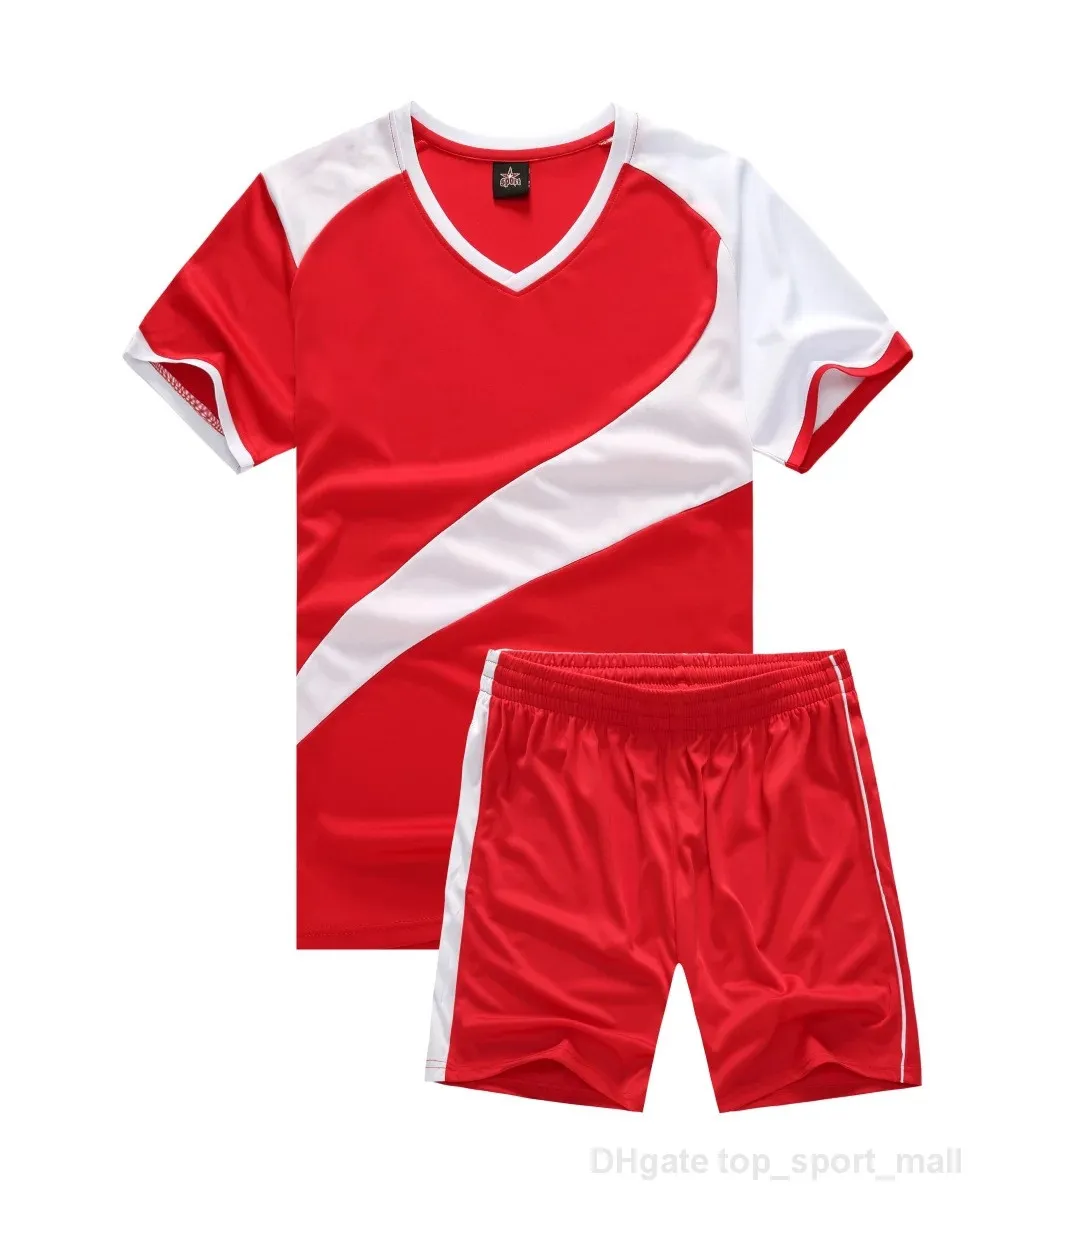 Soccer Jersey Football Kits Color Blue White Black Red 258562447